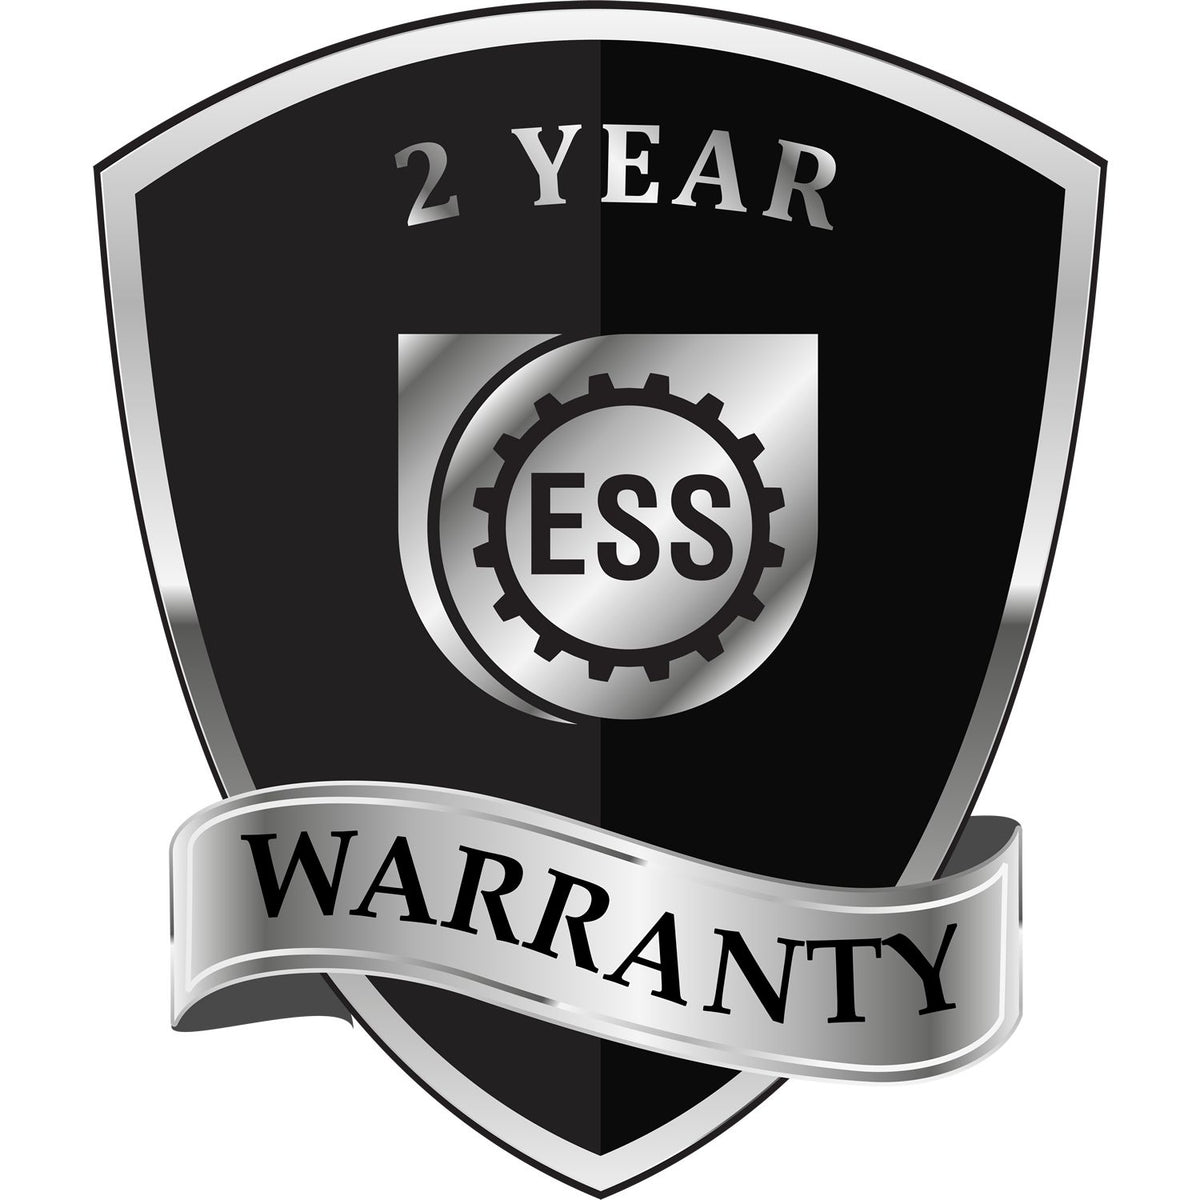 A black and silver badge or emblem showing warranty information for the Kentucky Geologist Desk Seal